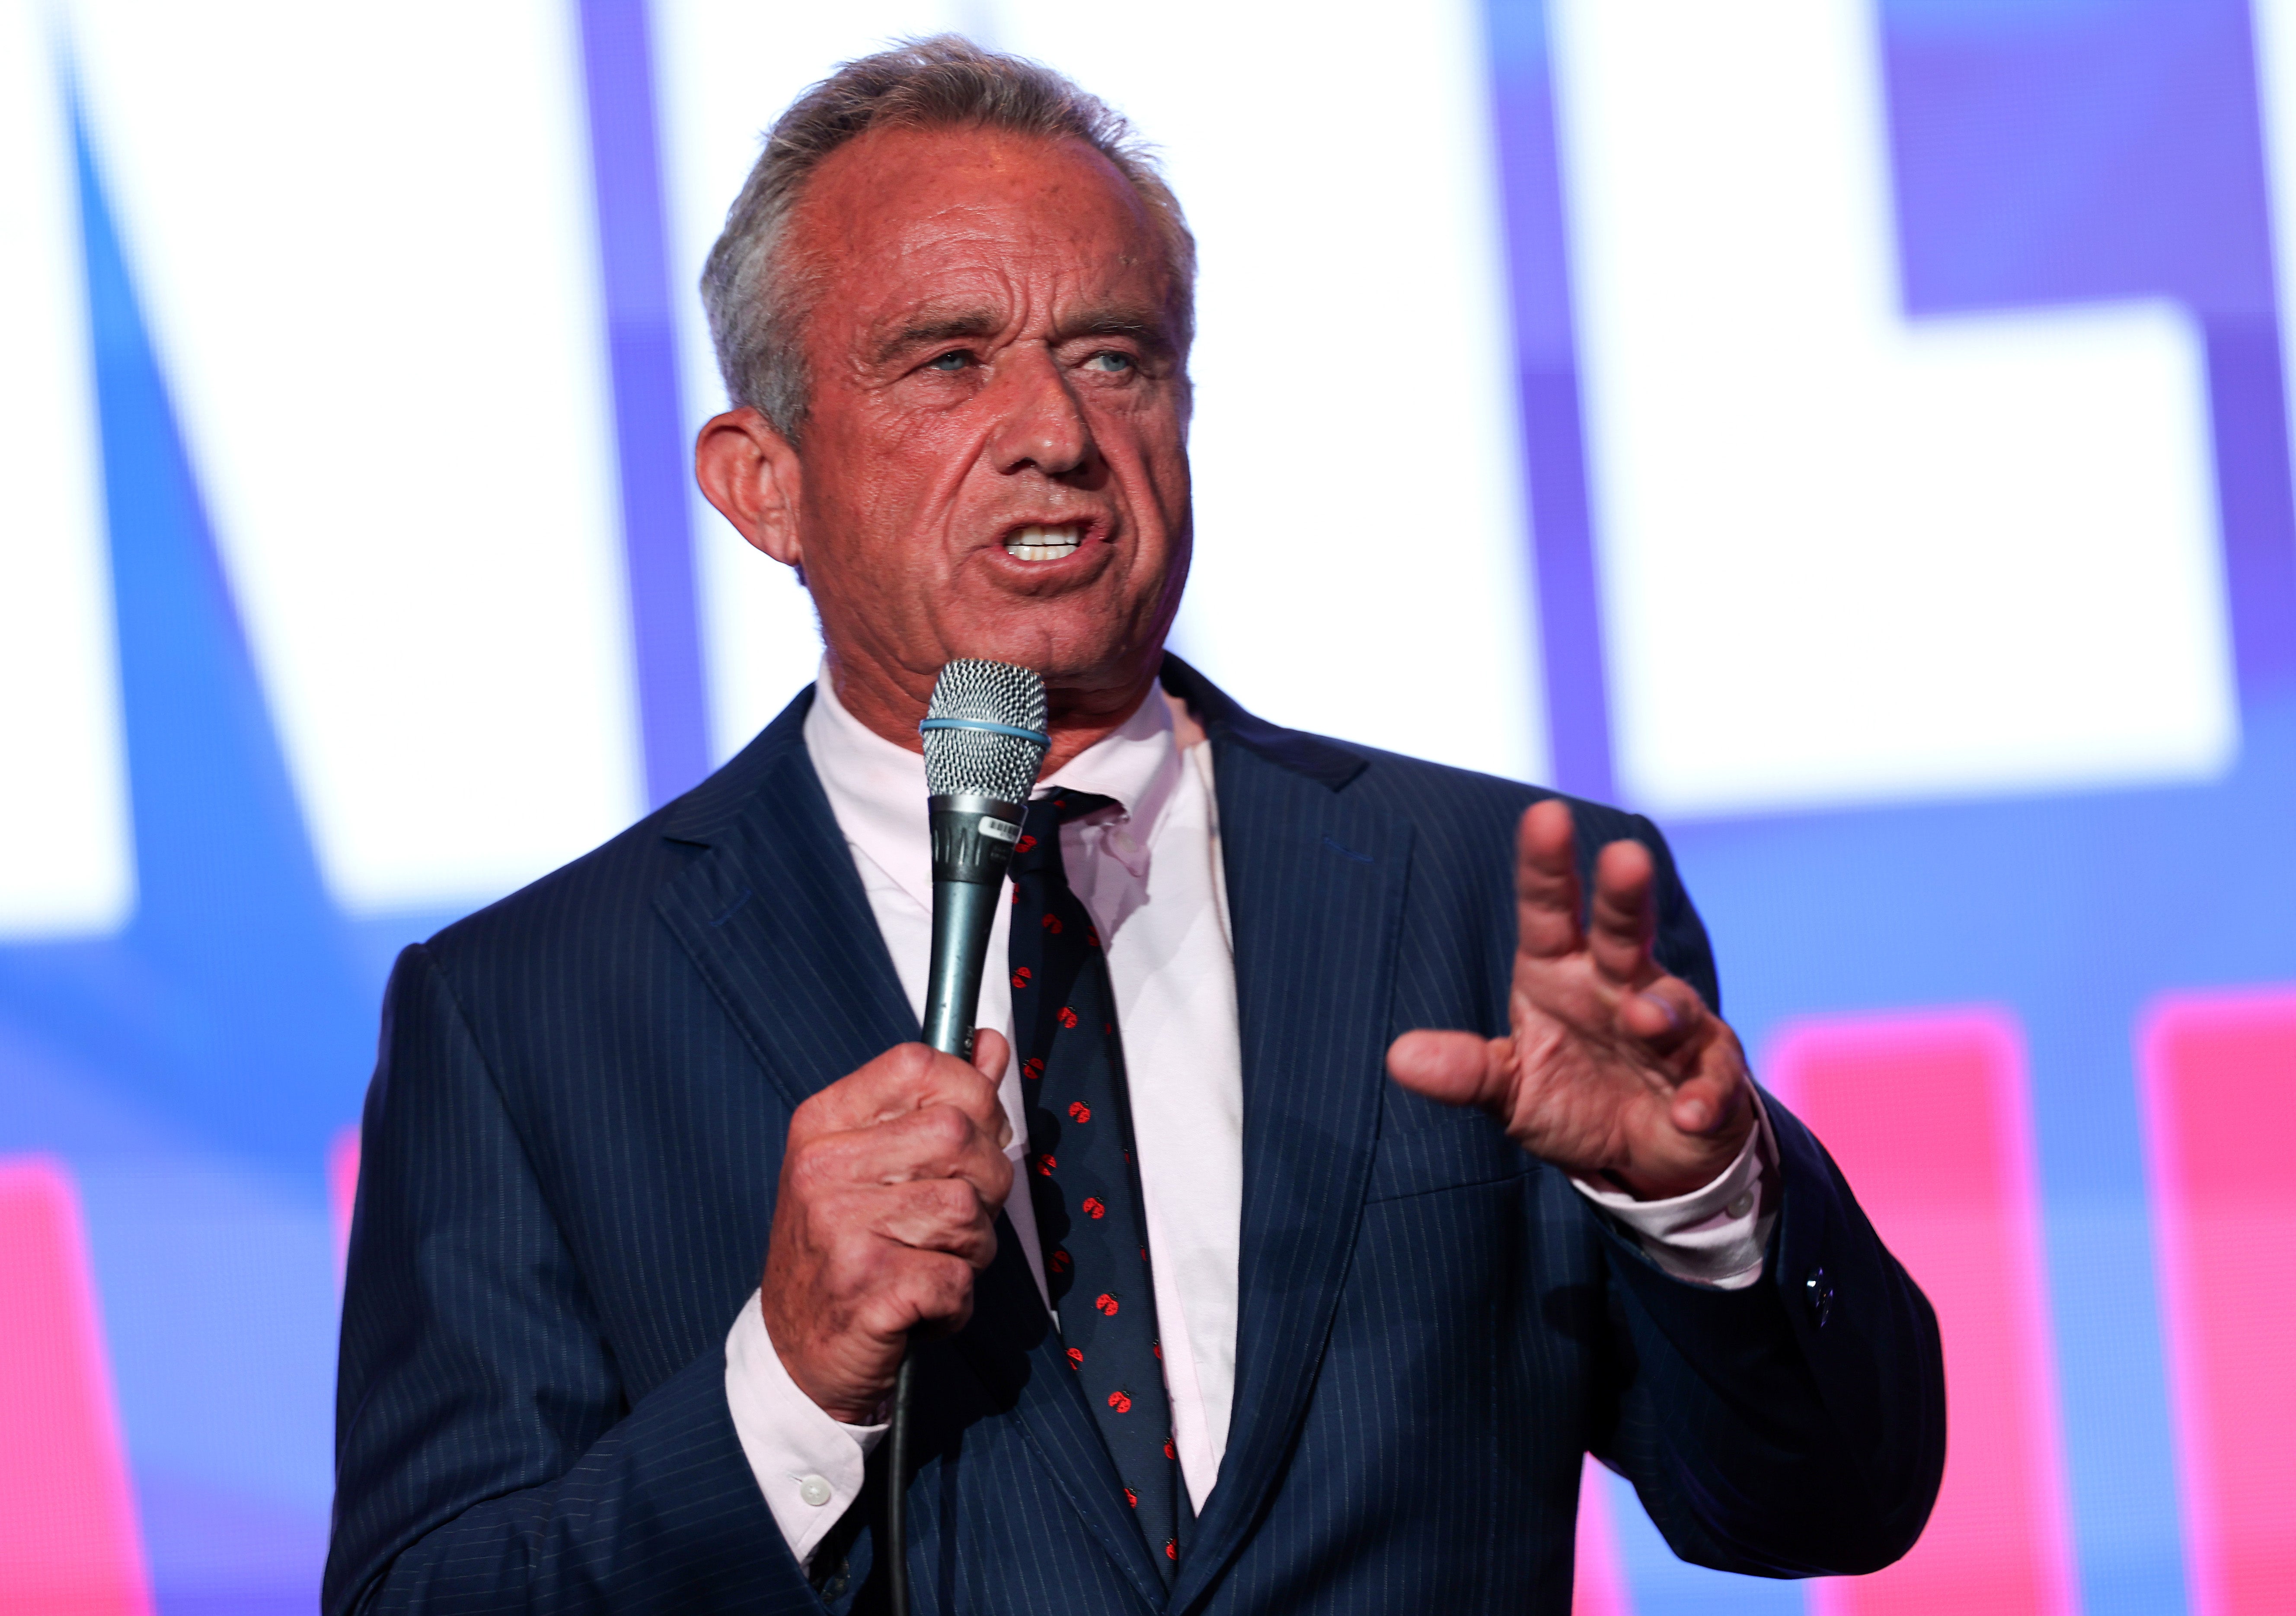 Independent presidential candidate Robert F. Kennedy Jr. speaks at the Libertarian National Convention on May 24